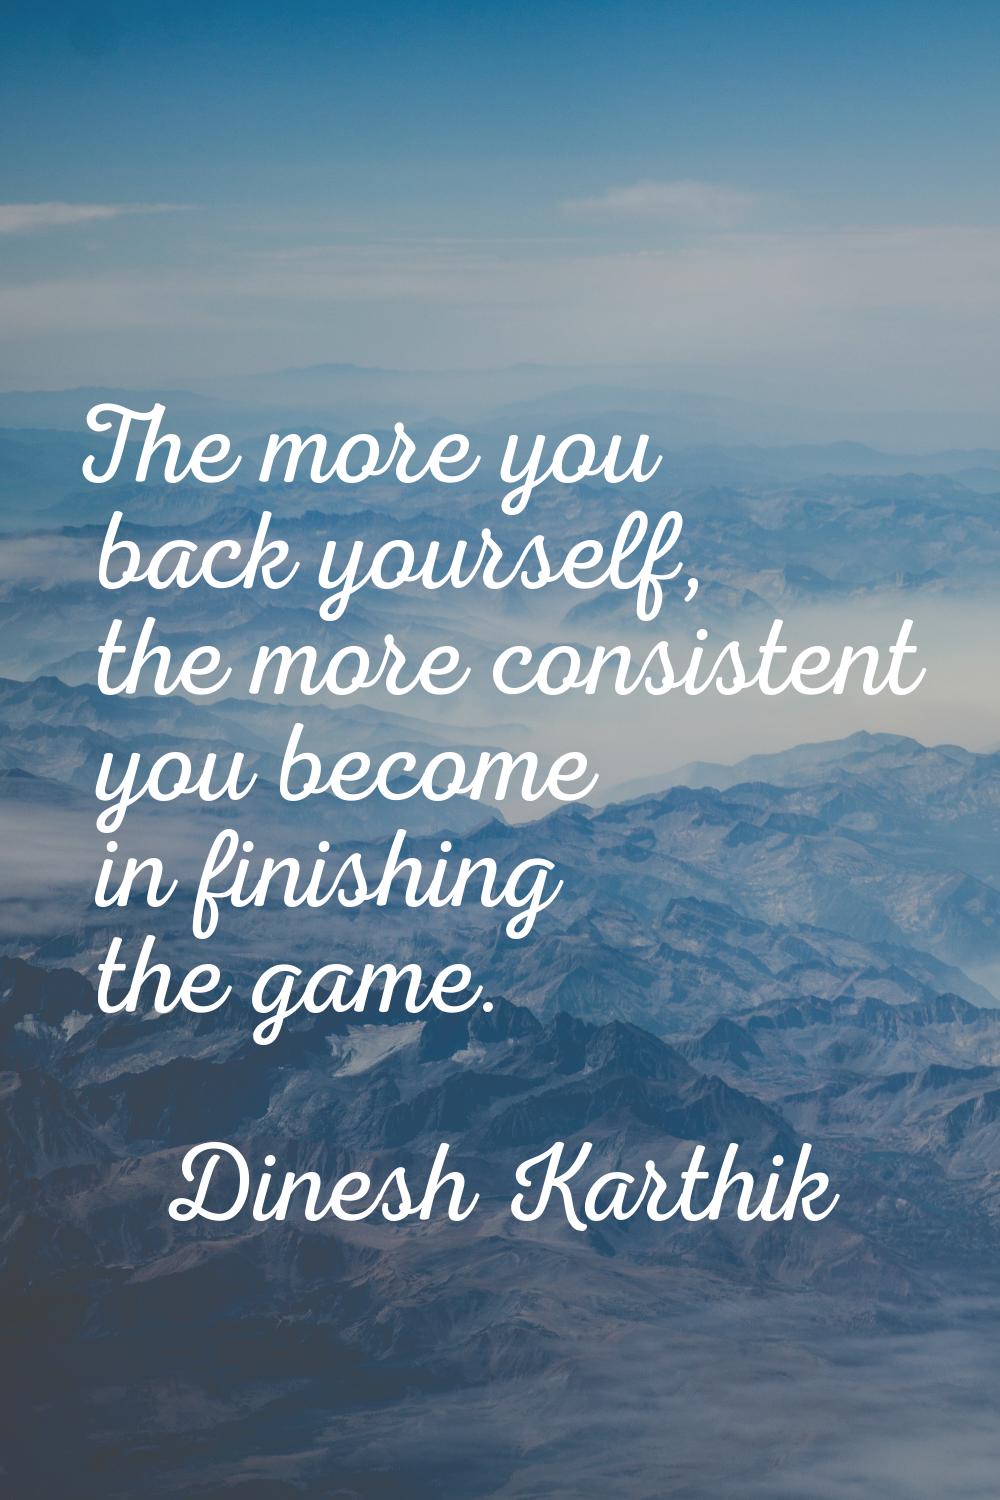 The more you back yourself, the more consistent you become in finishing the game.